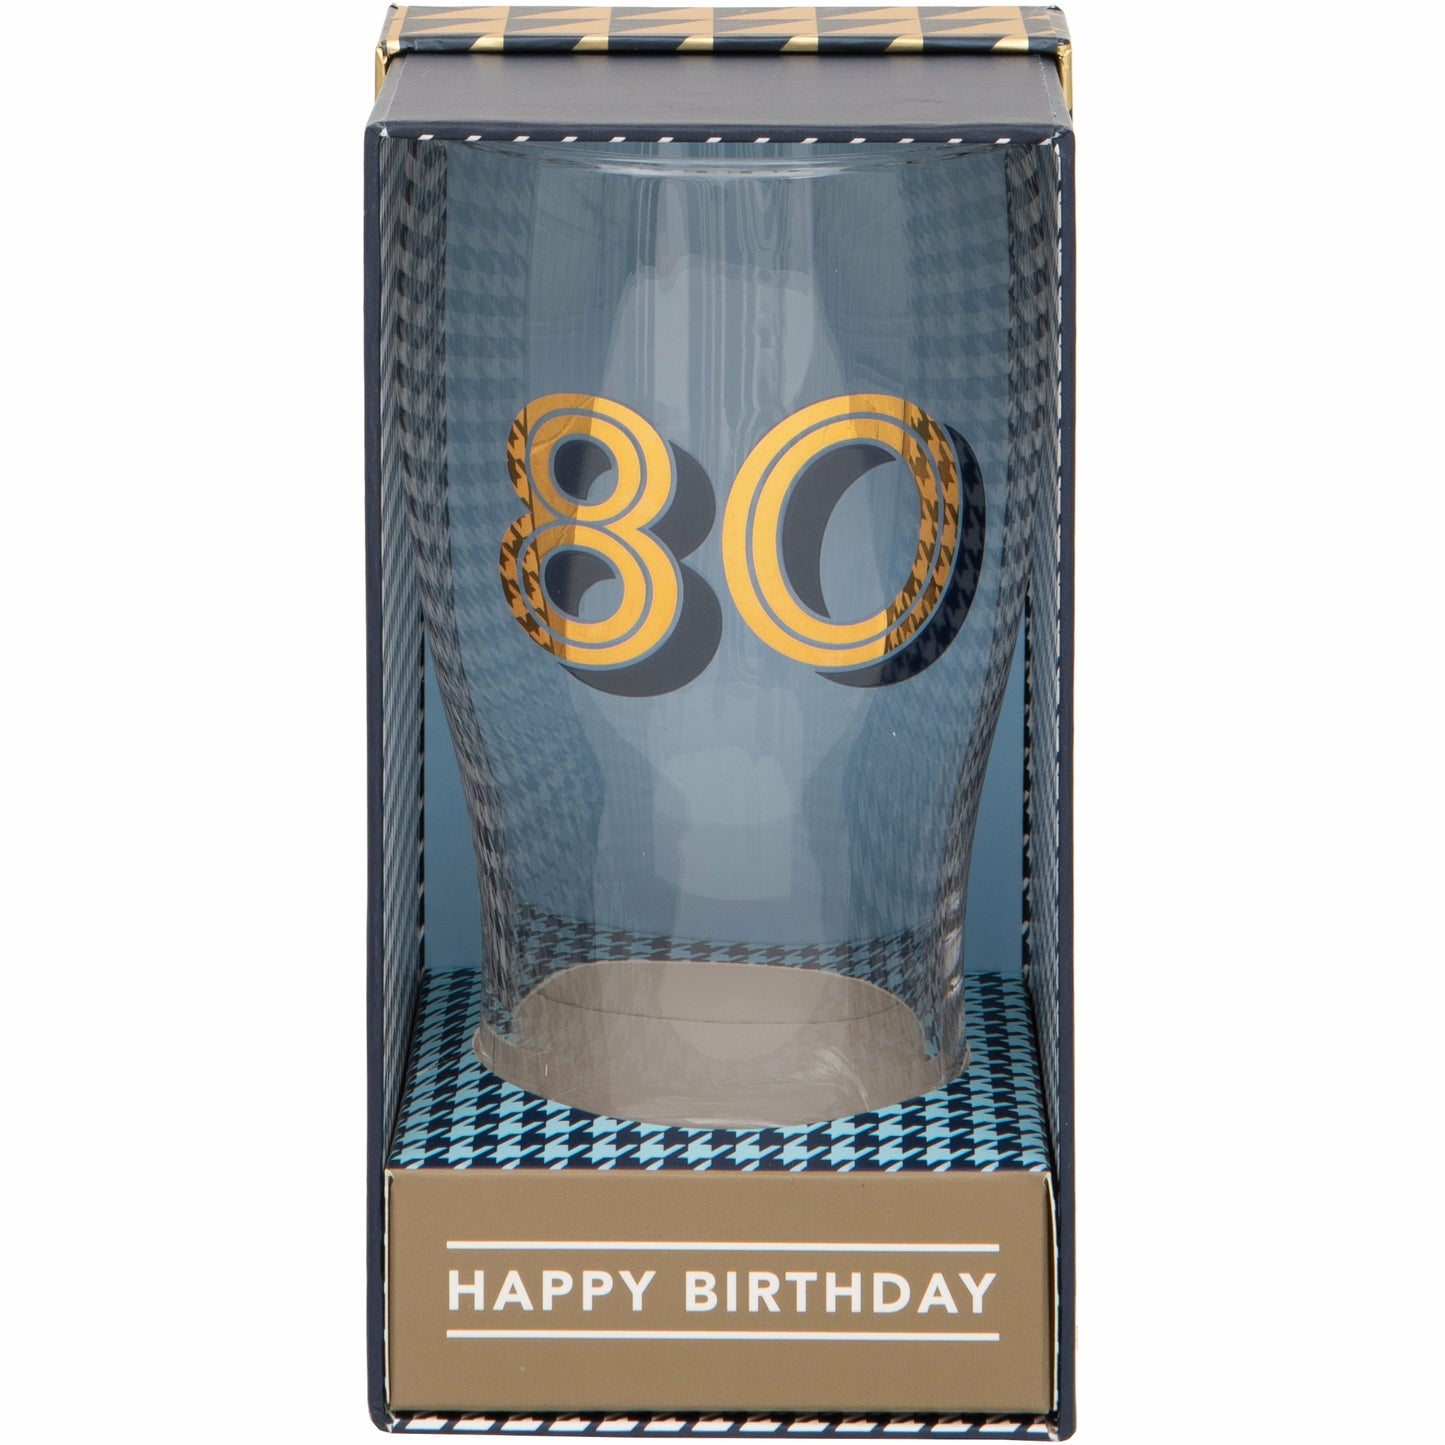 Gold Collection 80th Birthday Beer Glass